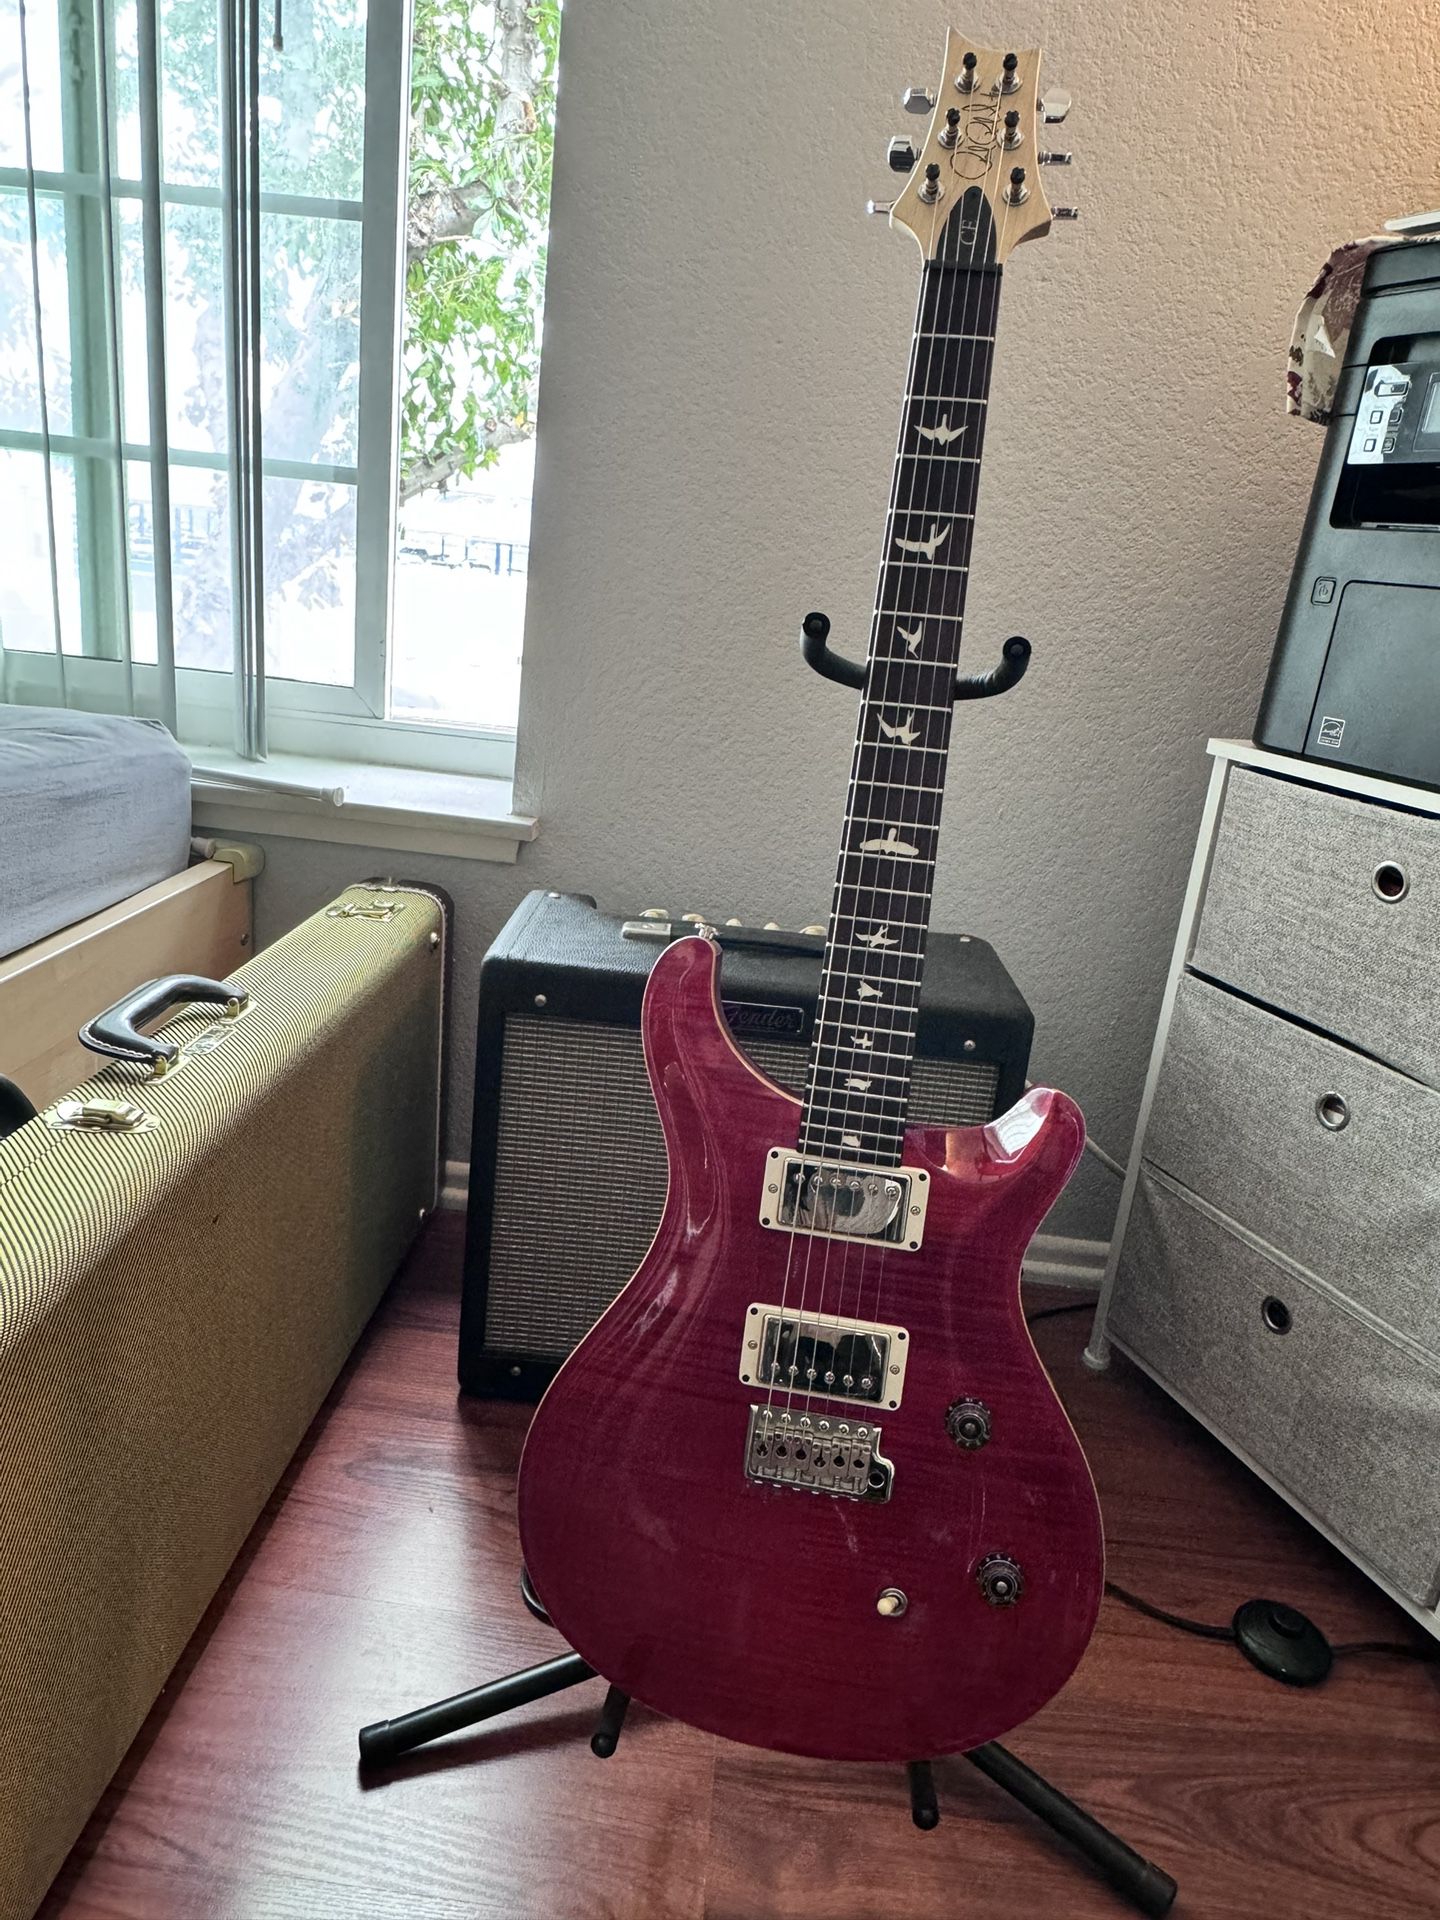 PRs CE 24 Solid Body